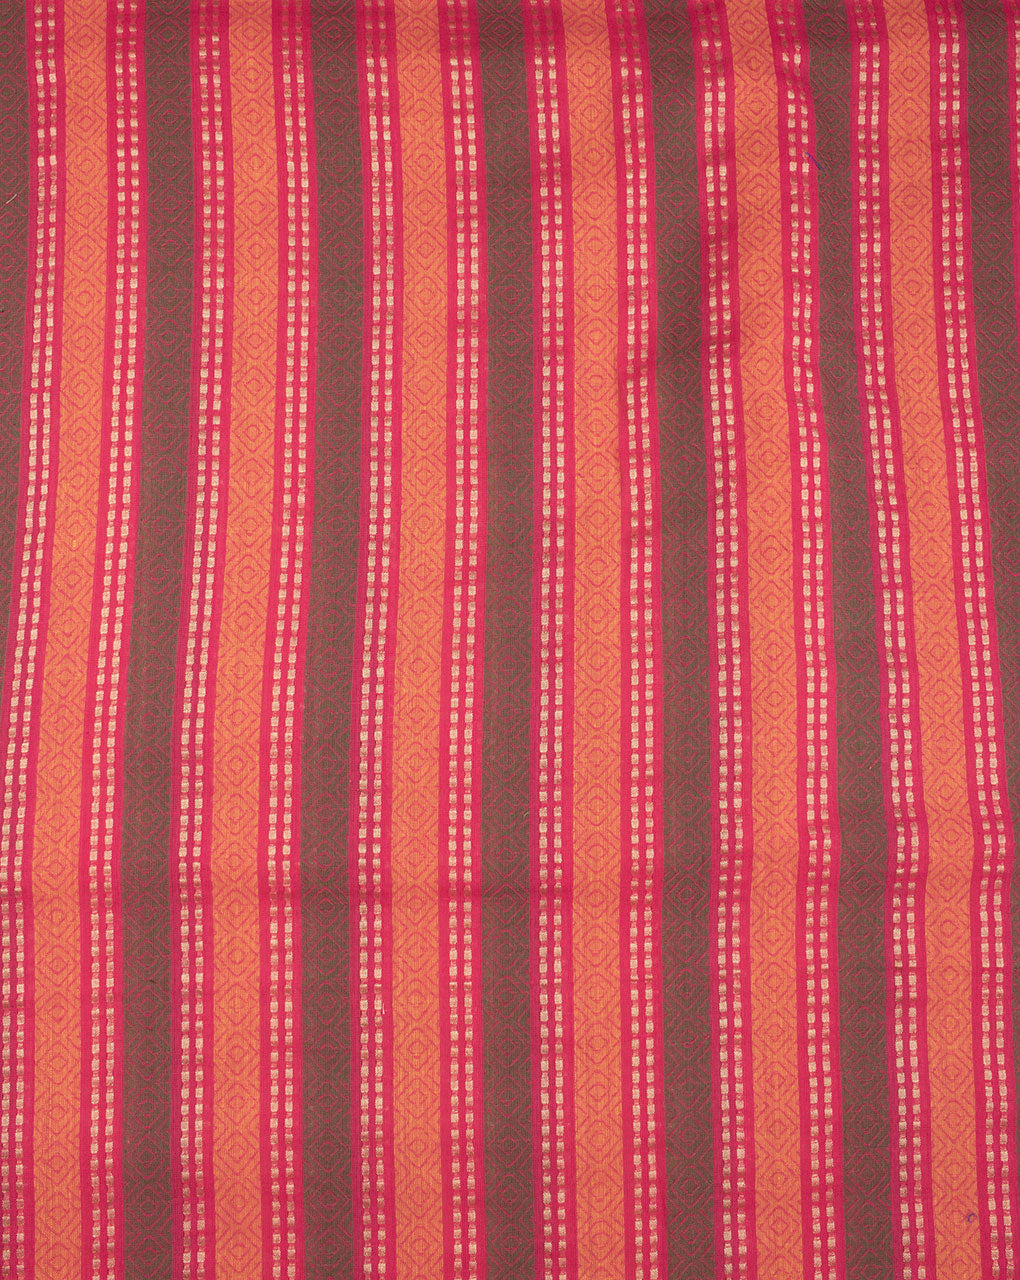 Stripes Woven Dobby Loom Textured Cotton Fabric - Fabriclore.com